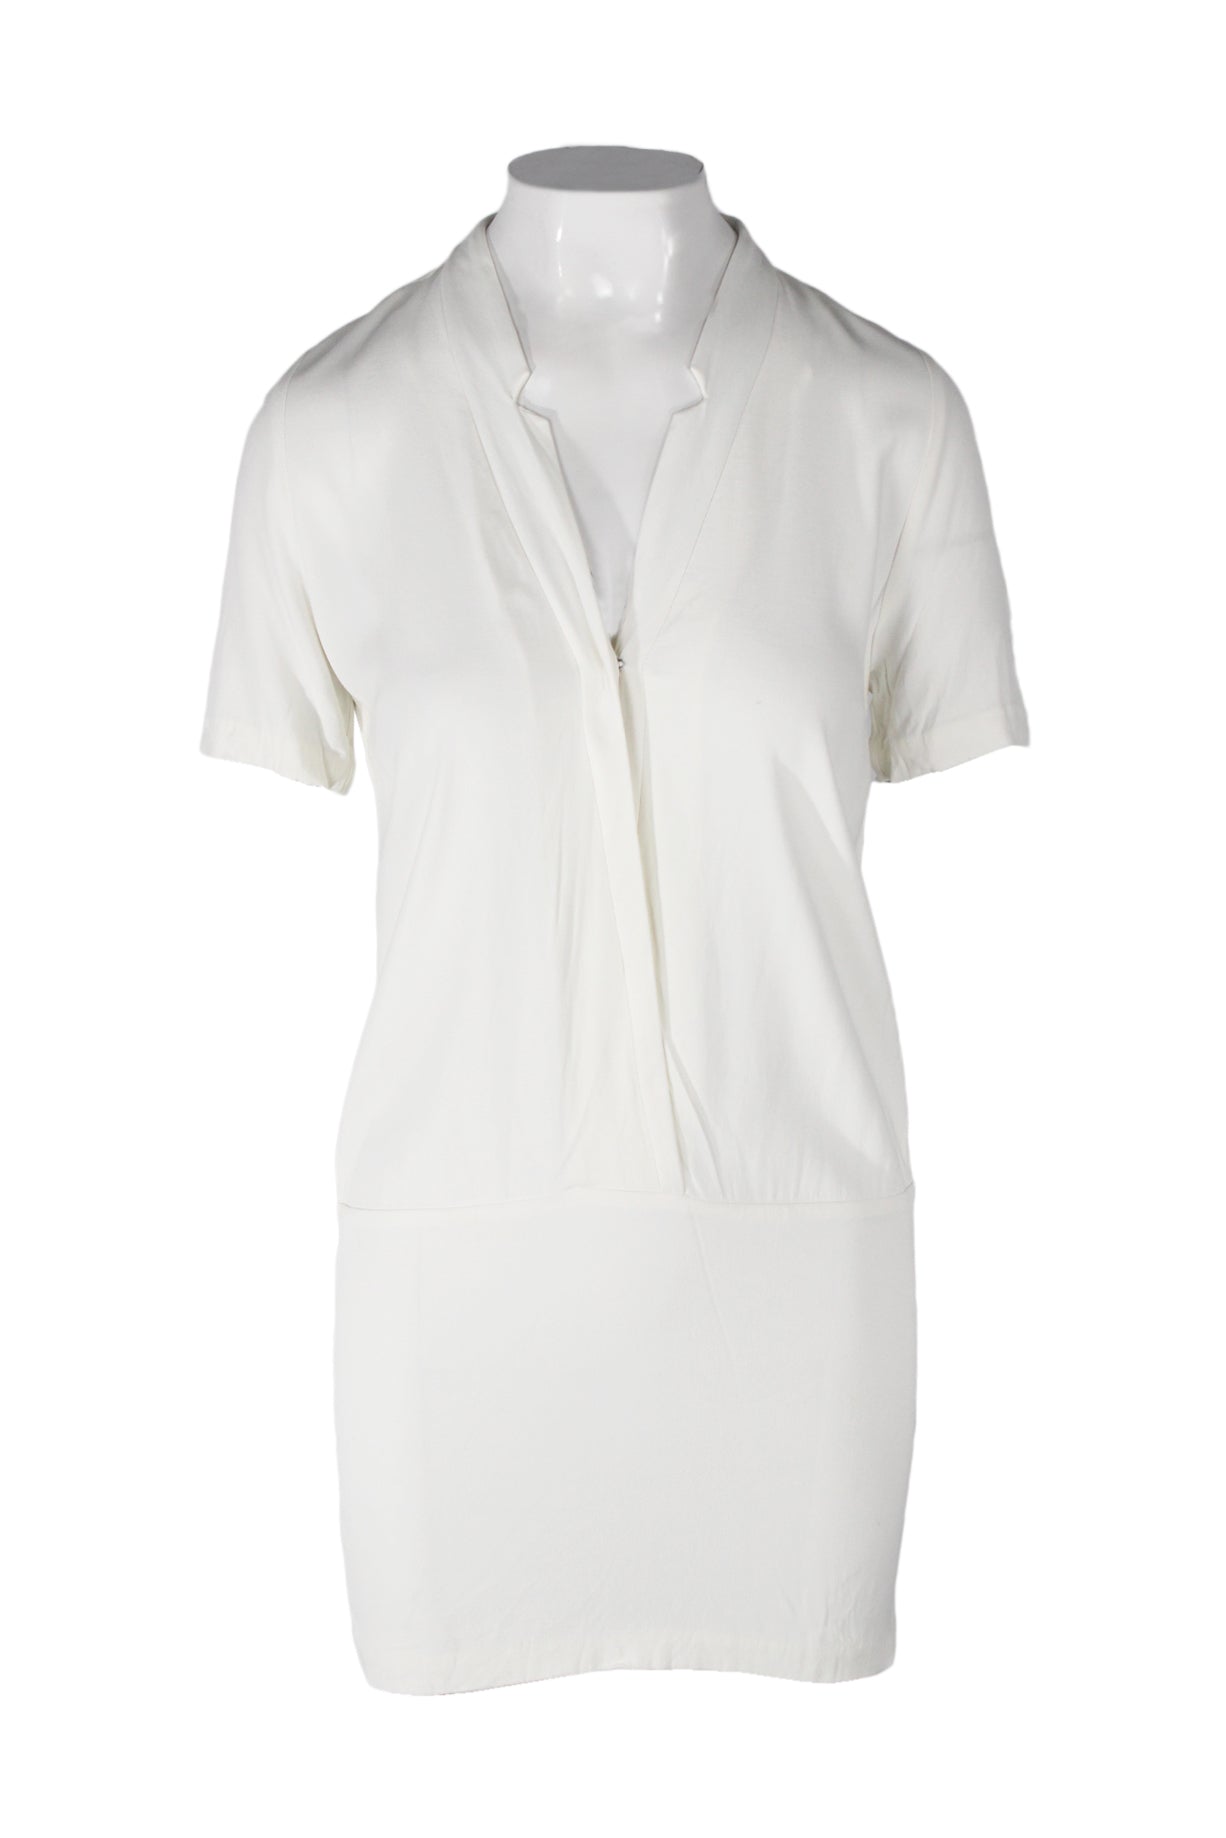 sandro ivory short sleeve mini dress. features dropped waist and notched v-neckline with interior single-snap closure. unlined. 